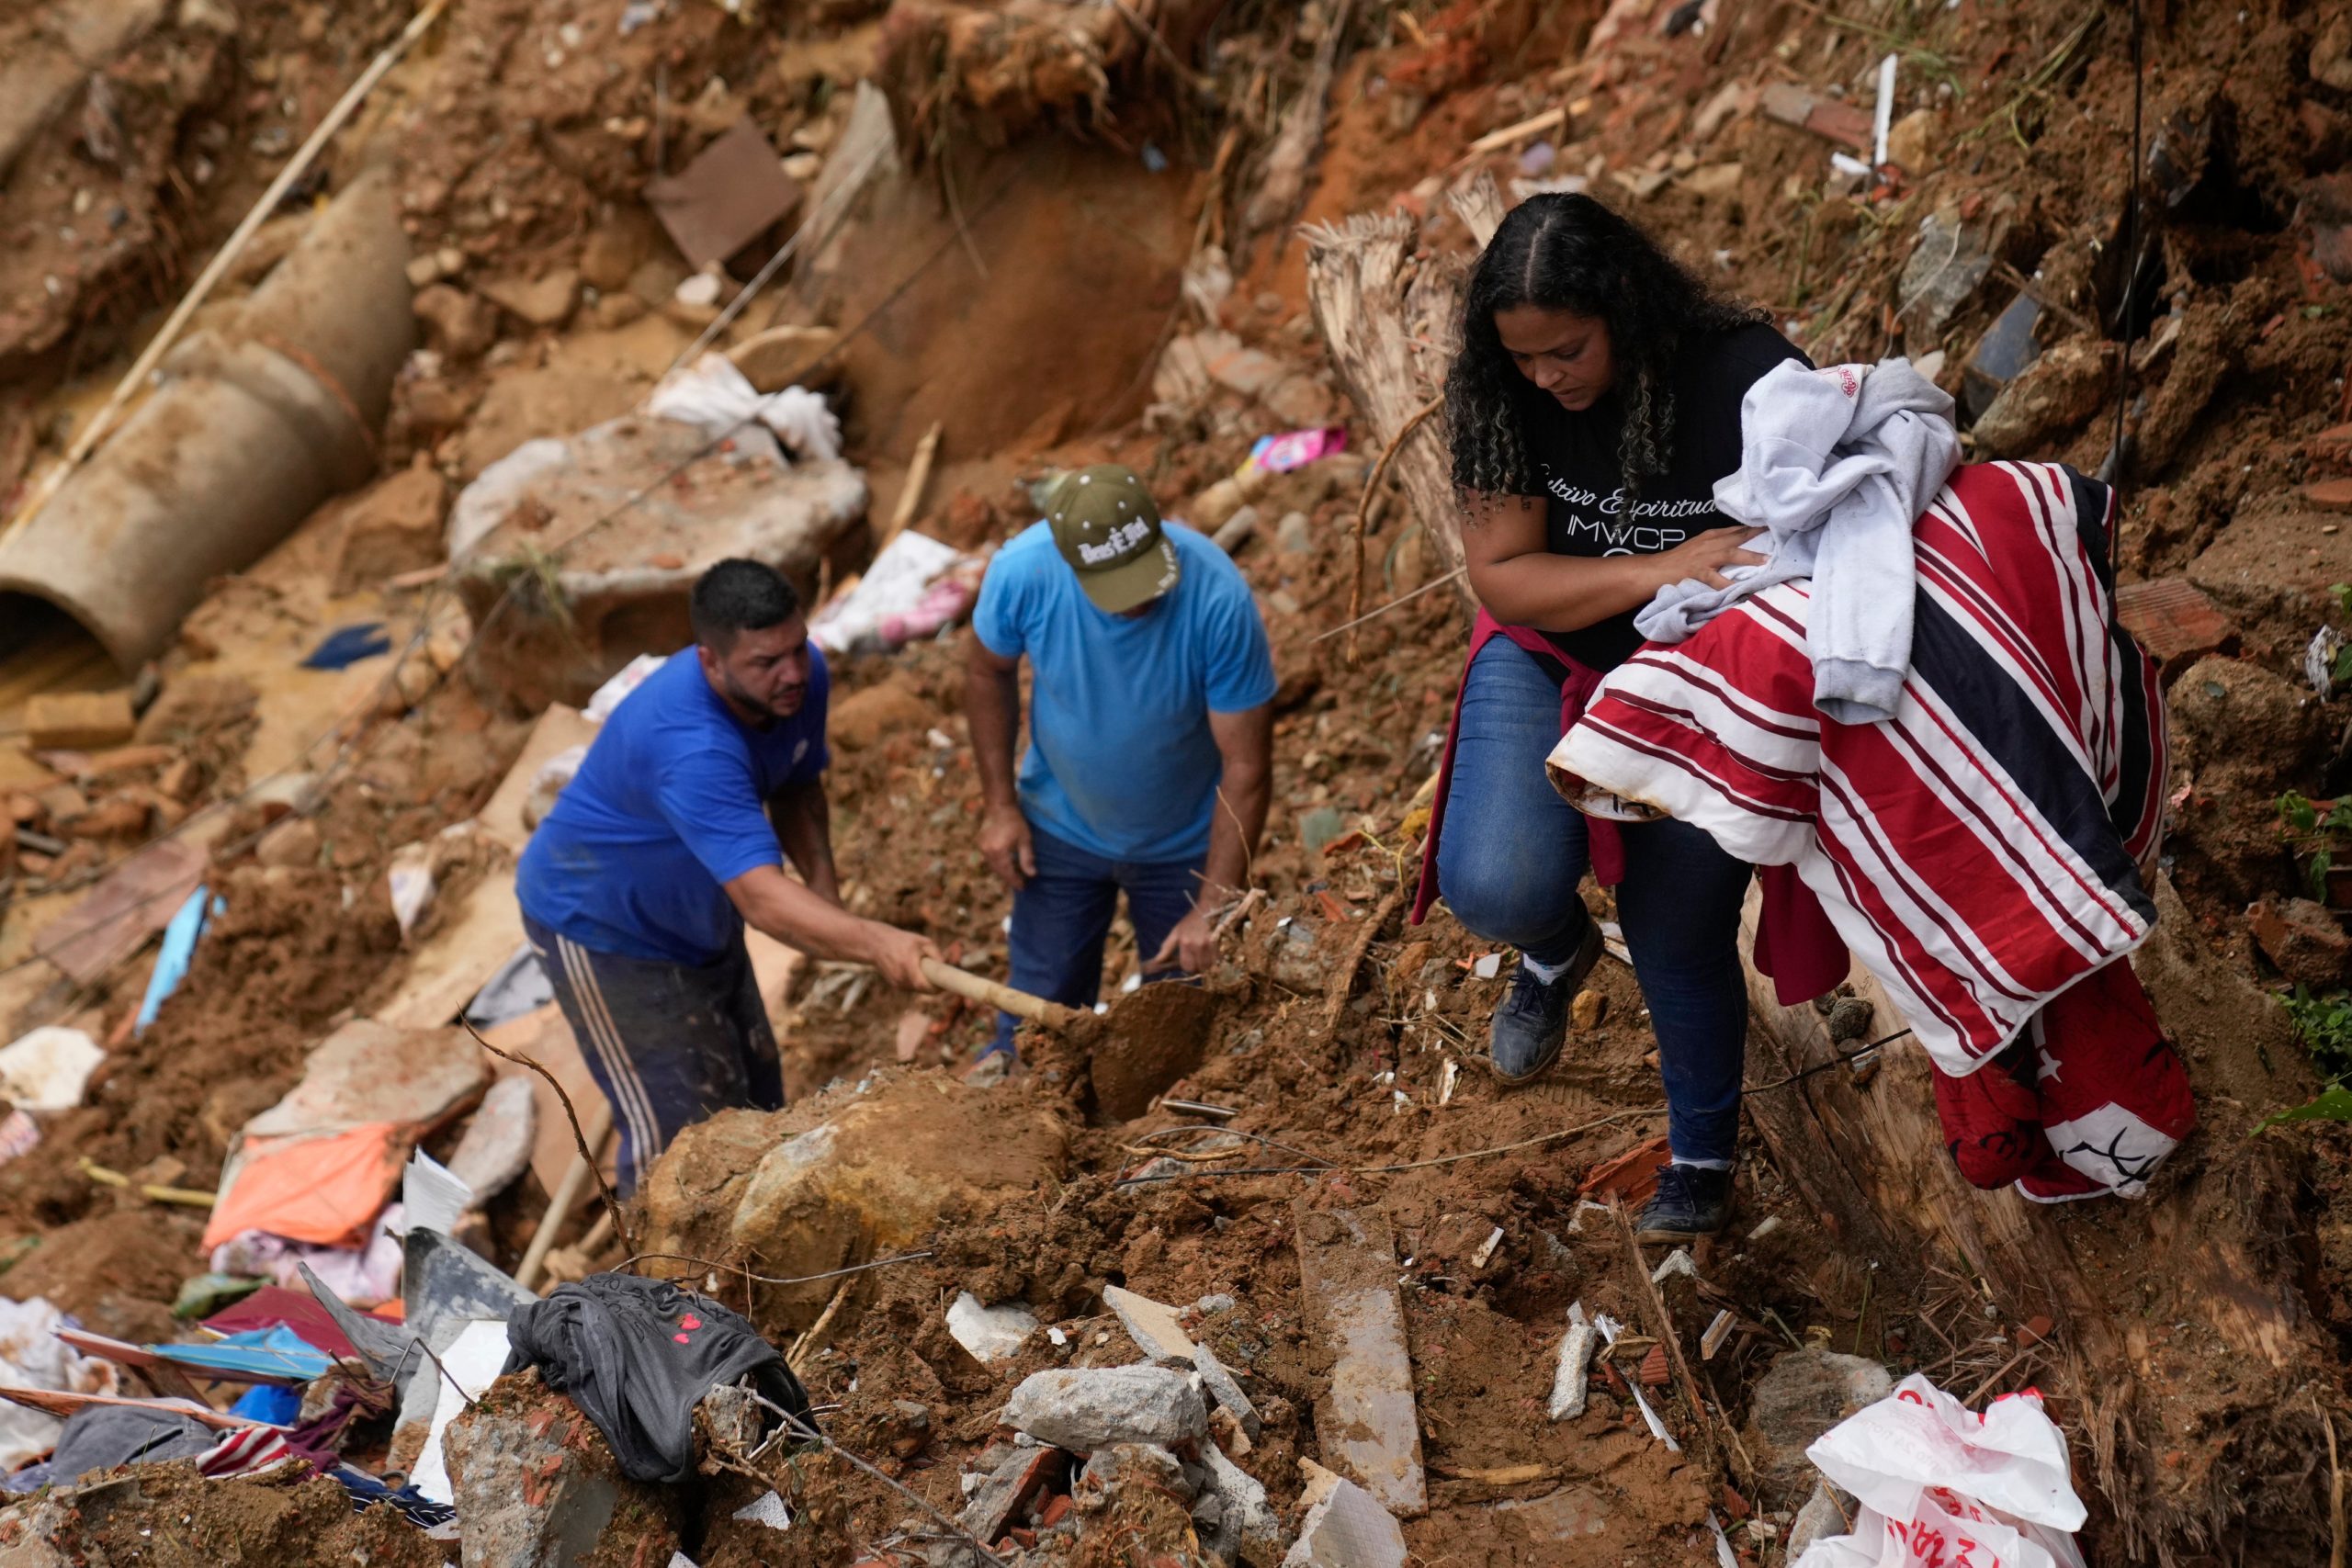 Priscilla Neves recovers belongings while waiting for news about her missing parents, who were in their family home when it was covered by mudslides. (Photo: Silvia Izquierdo, AP)